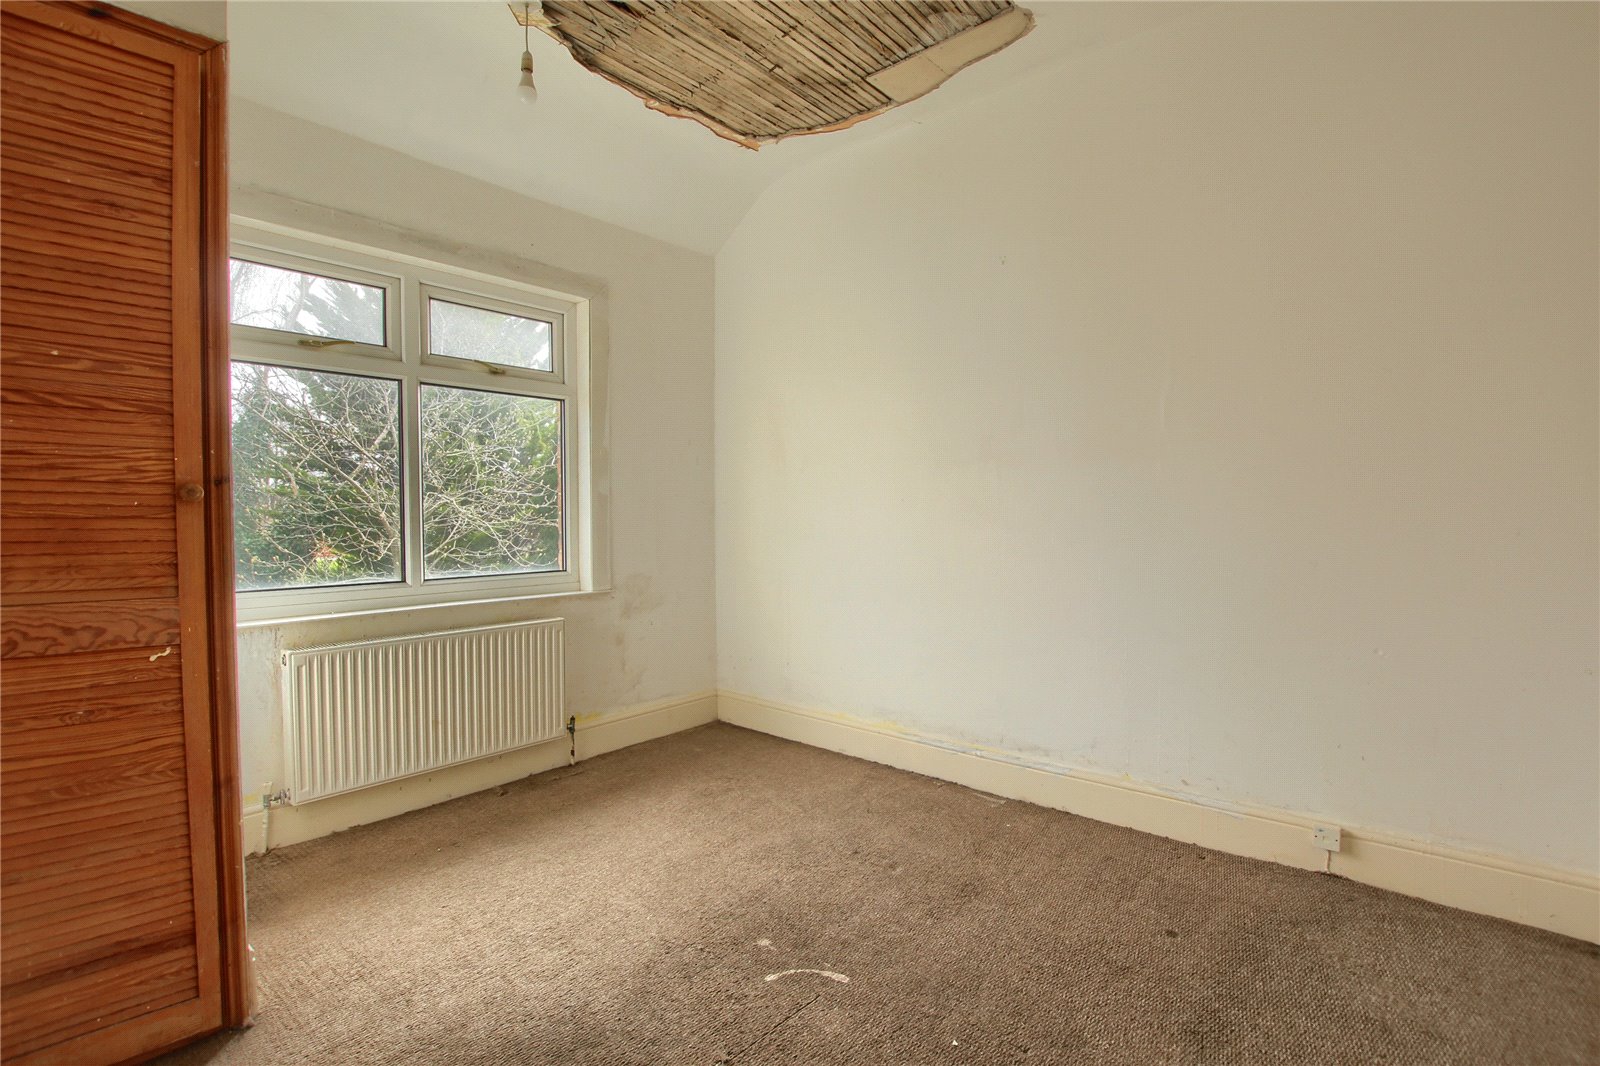 3 bed house for sale in Eton Road, Linthorpe  - Property Image 9